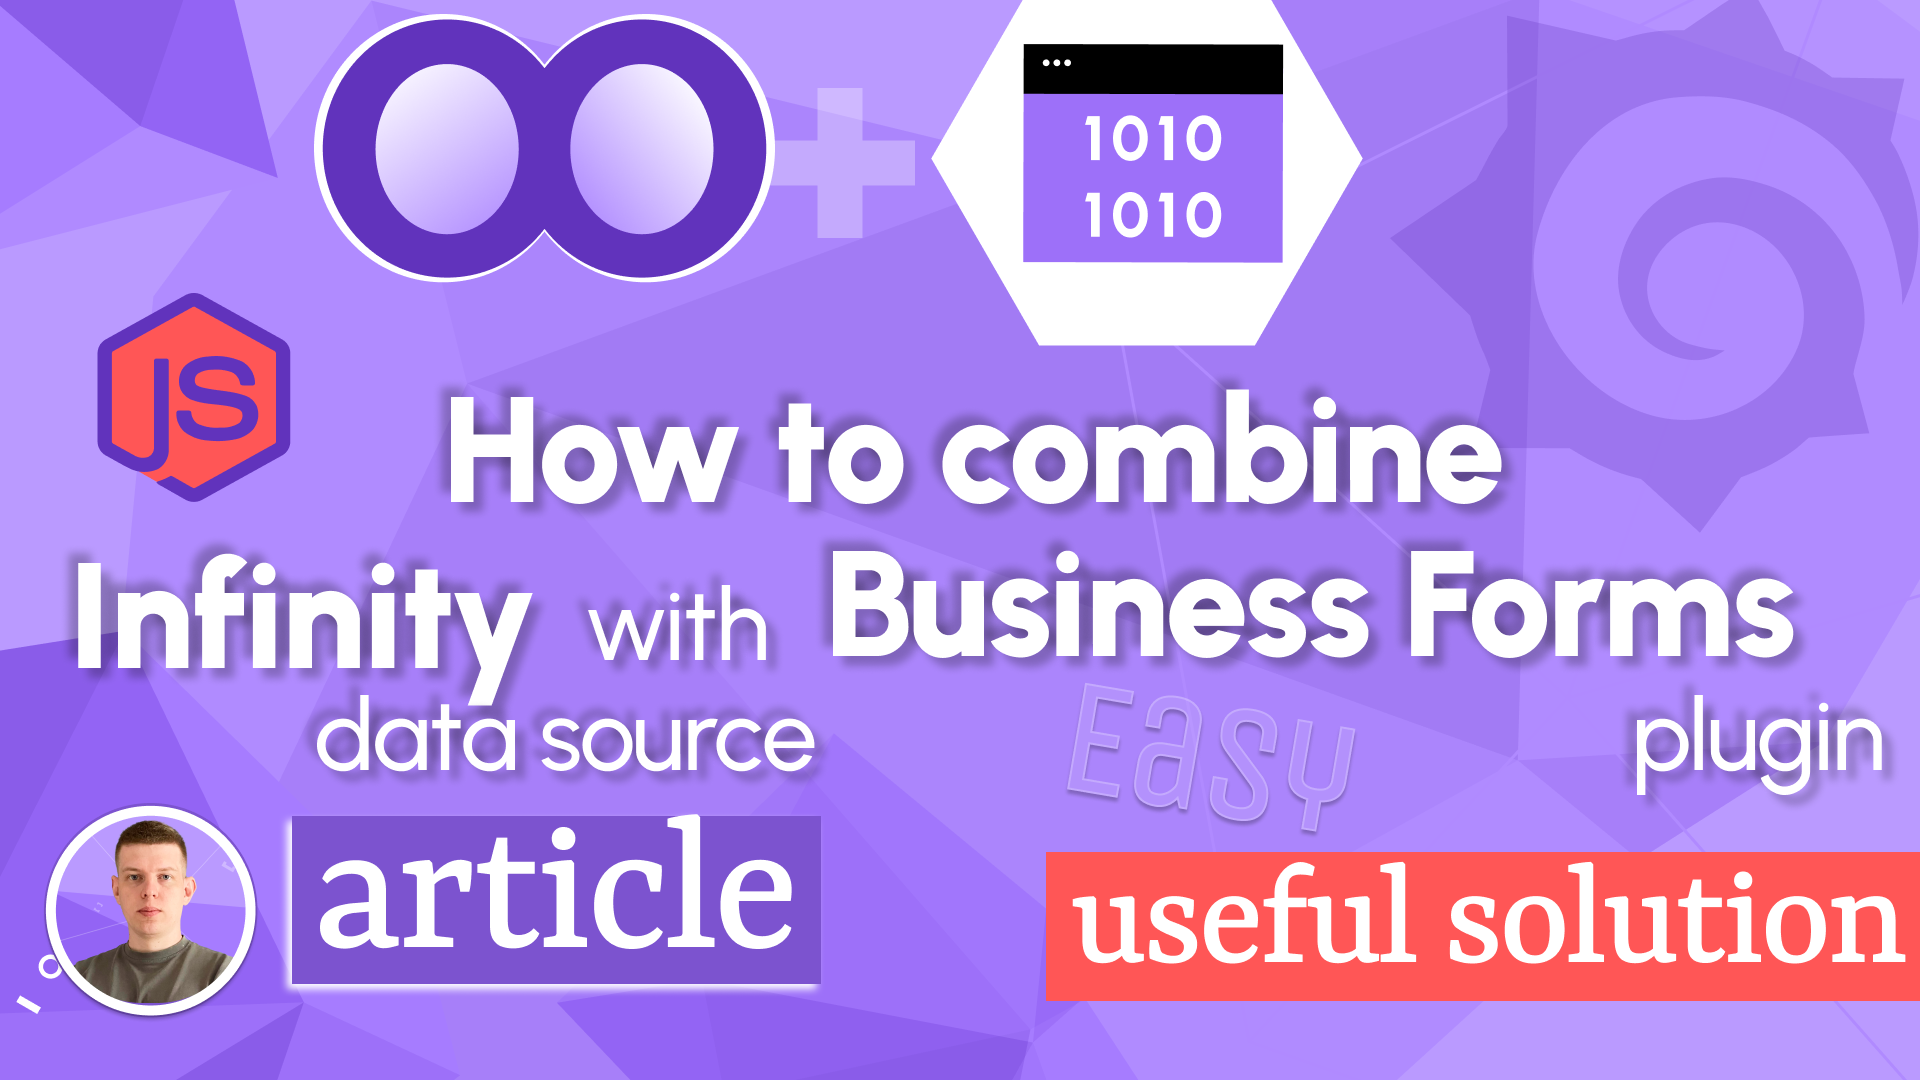 How to combine Infinity Data Source with the Business Forms